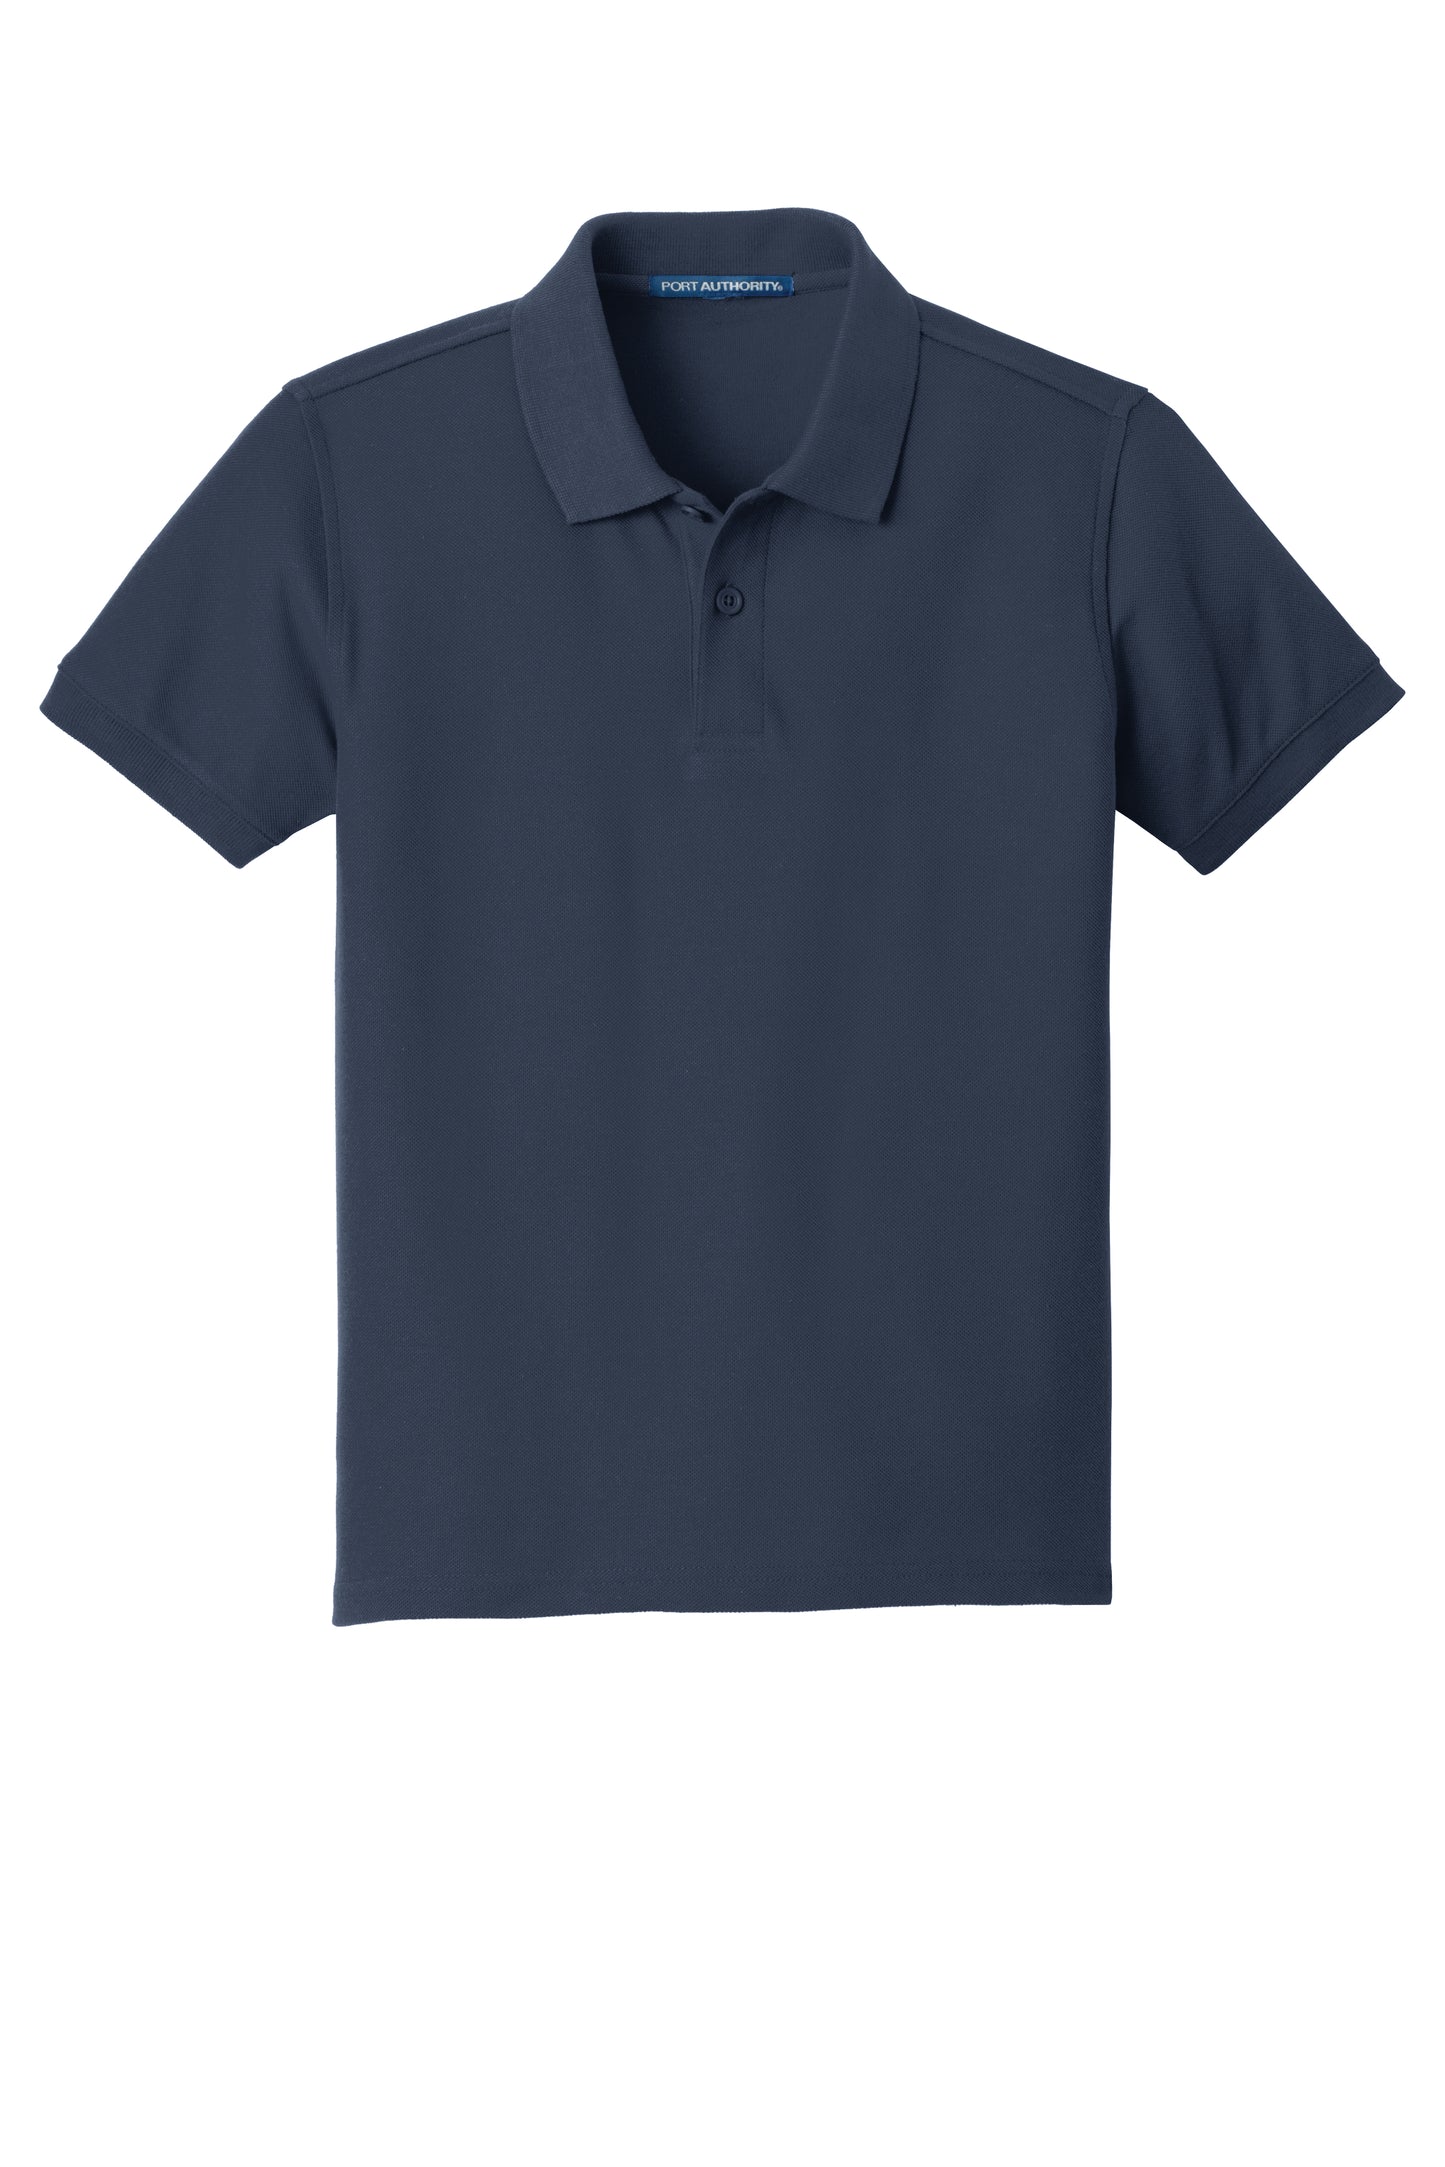 port authority youth core classic pique polo river blue navy